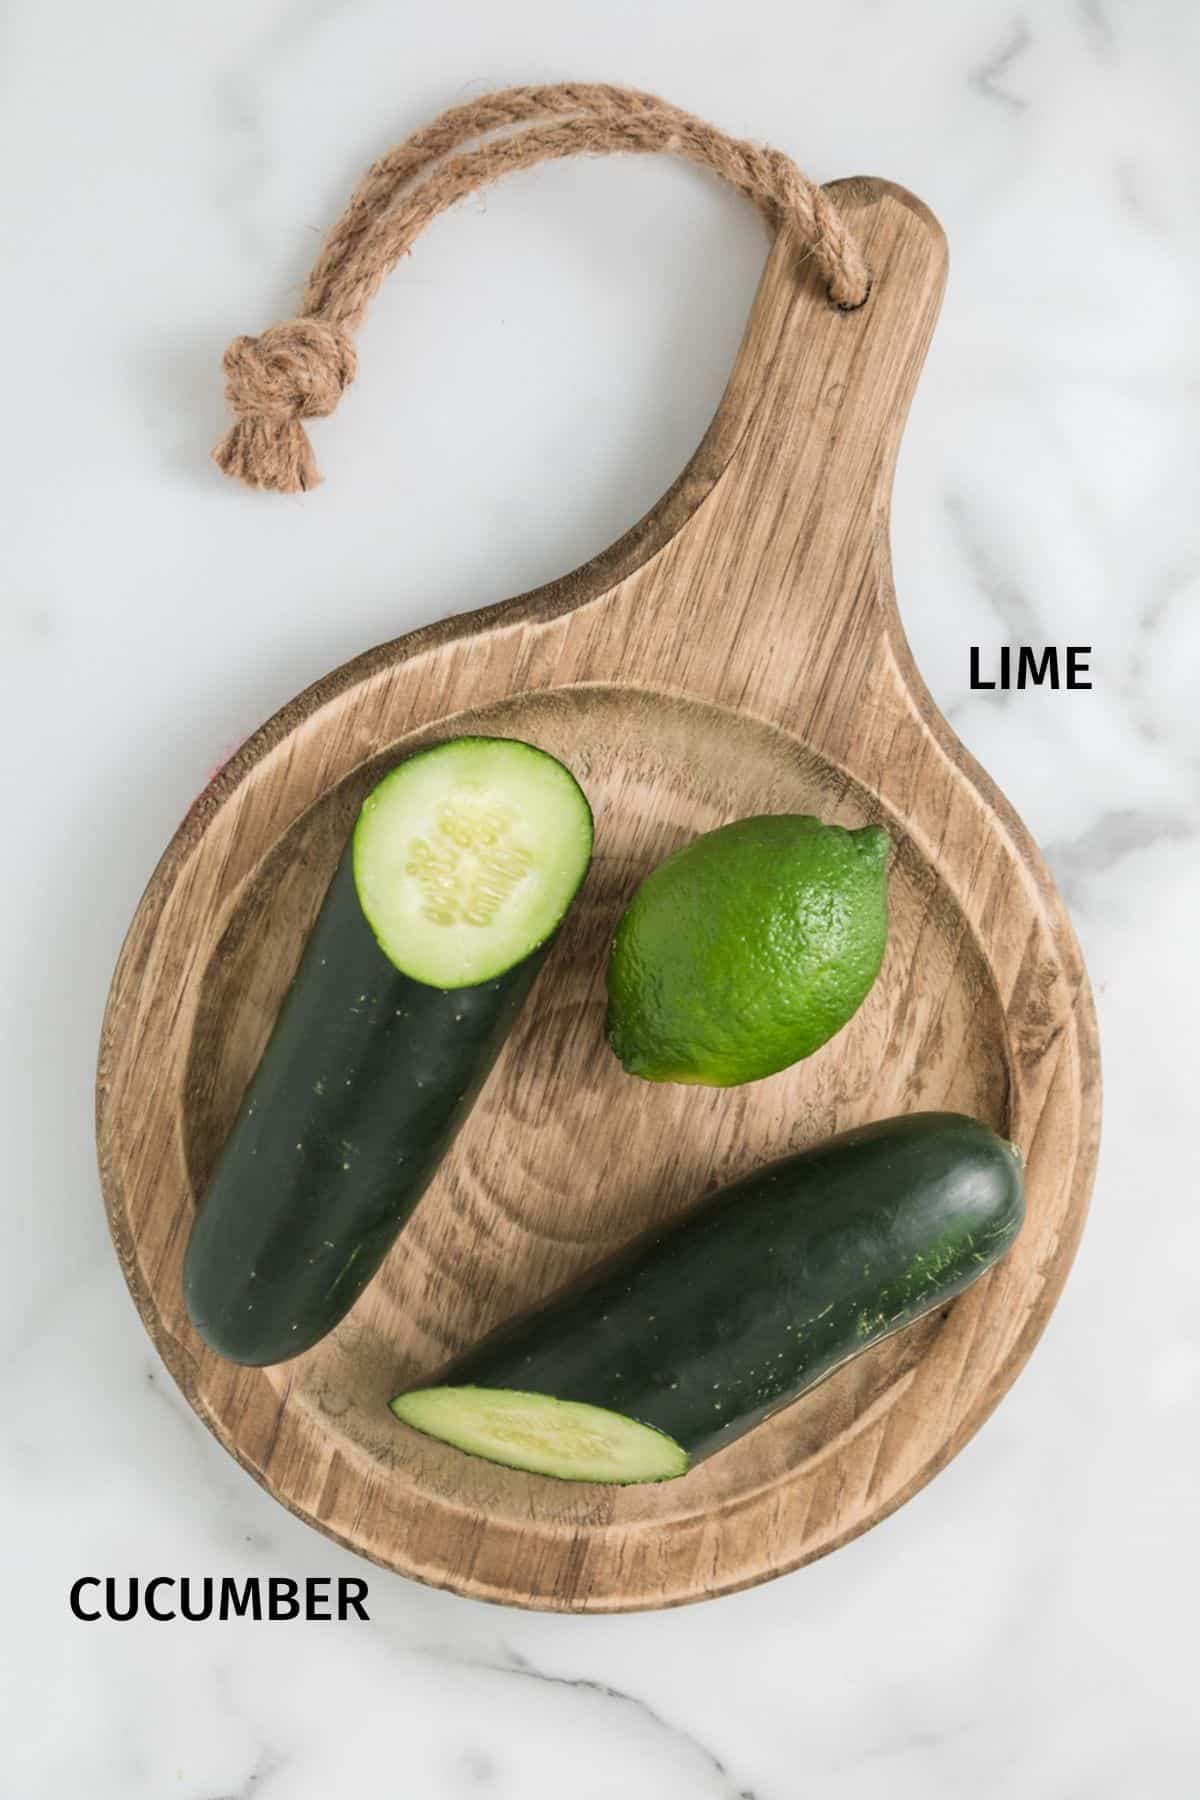 A lime and halved cucumber on a wood board.